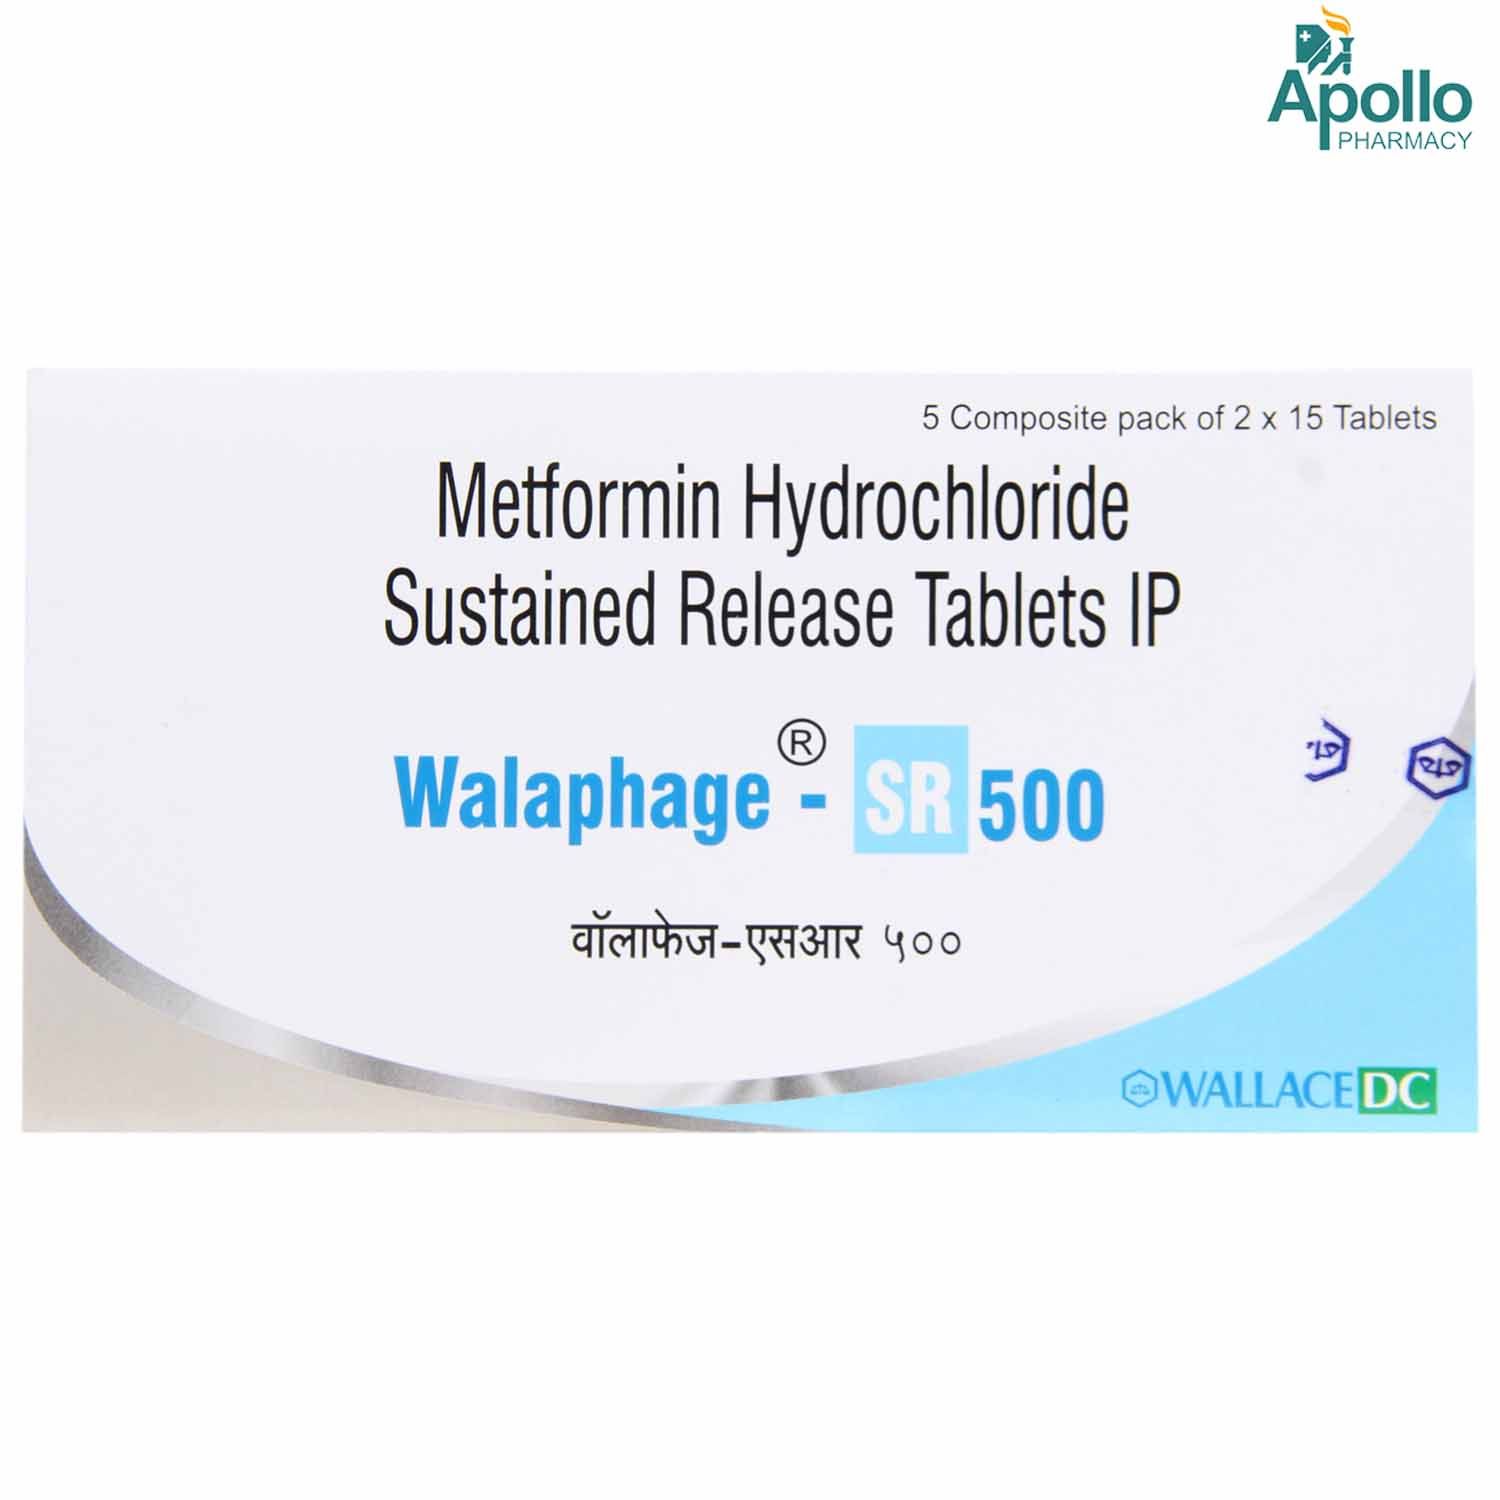 walaphage-sr-500-tablet-15-s-price-uses-side-effects-composition